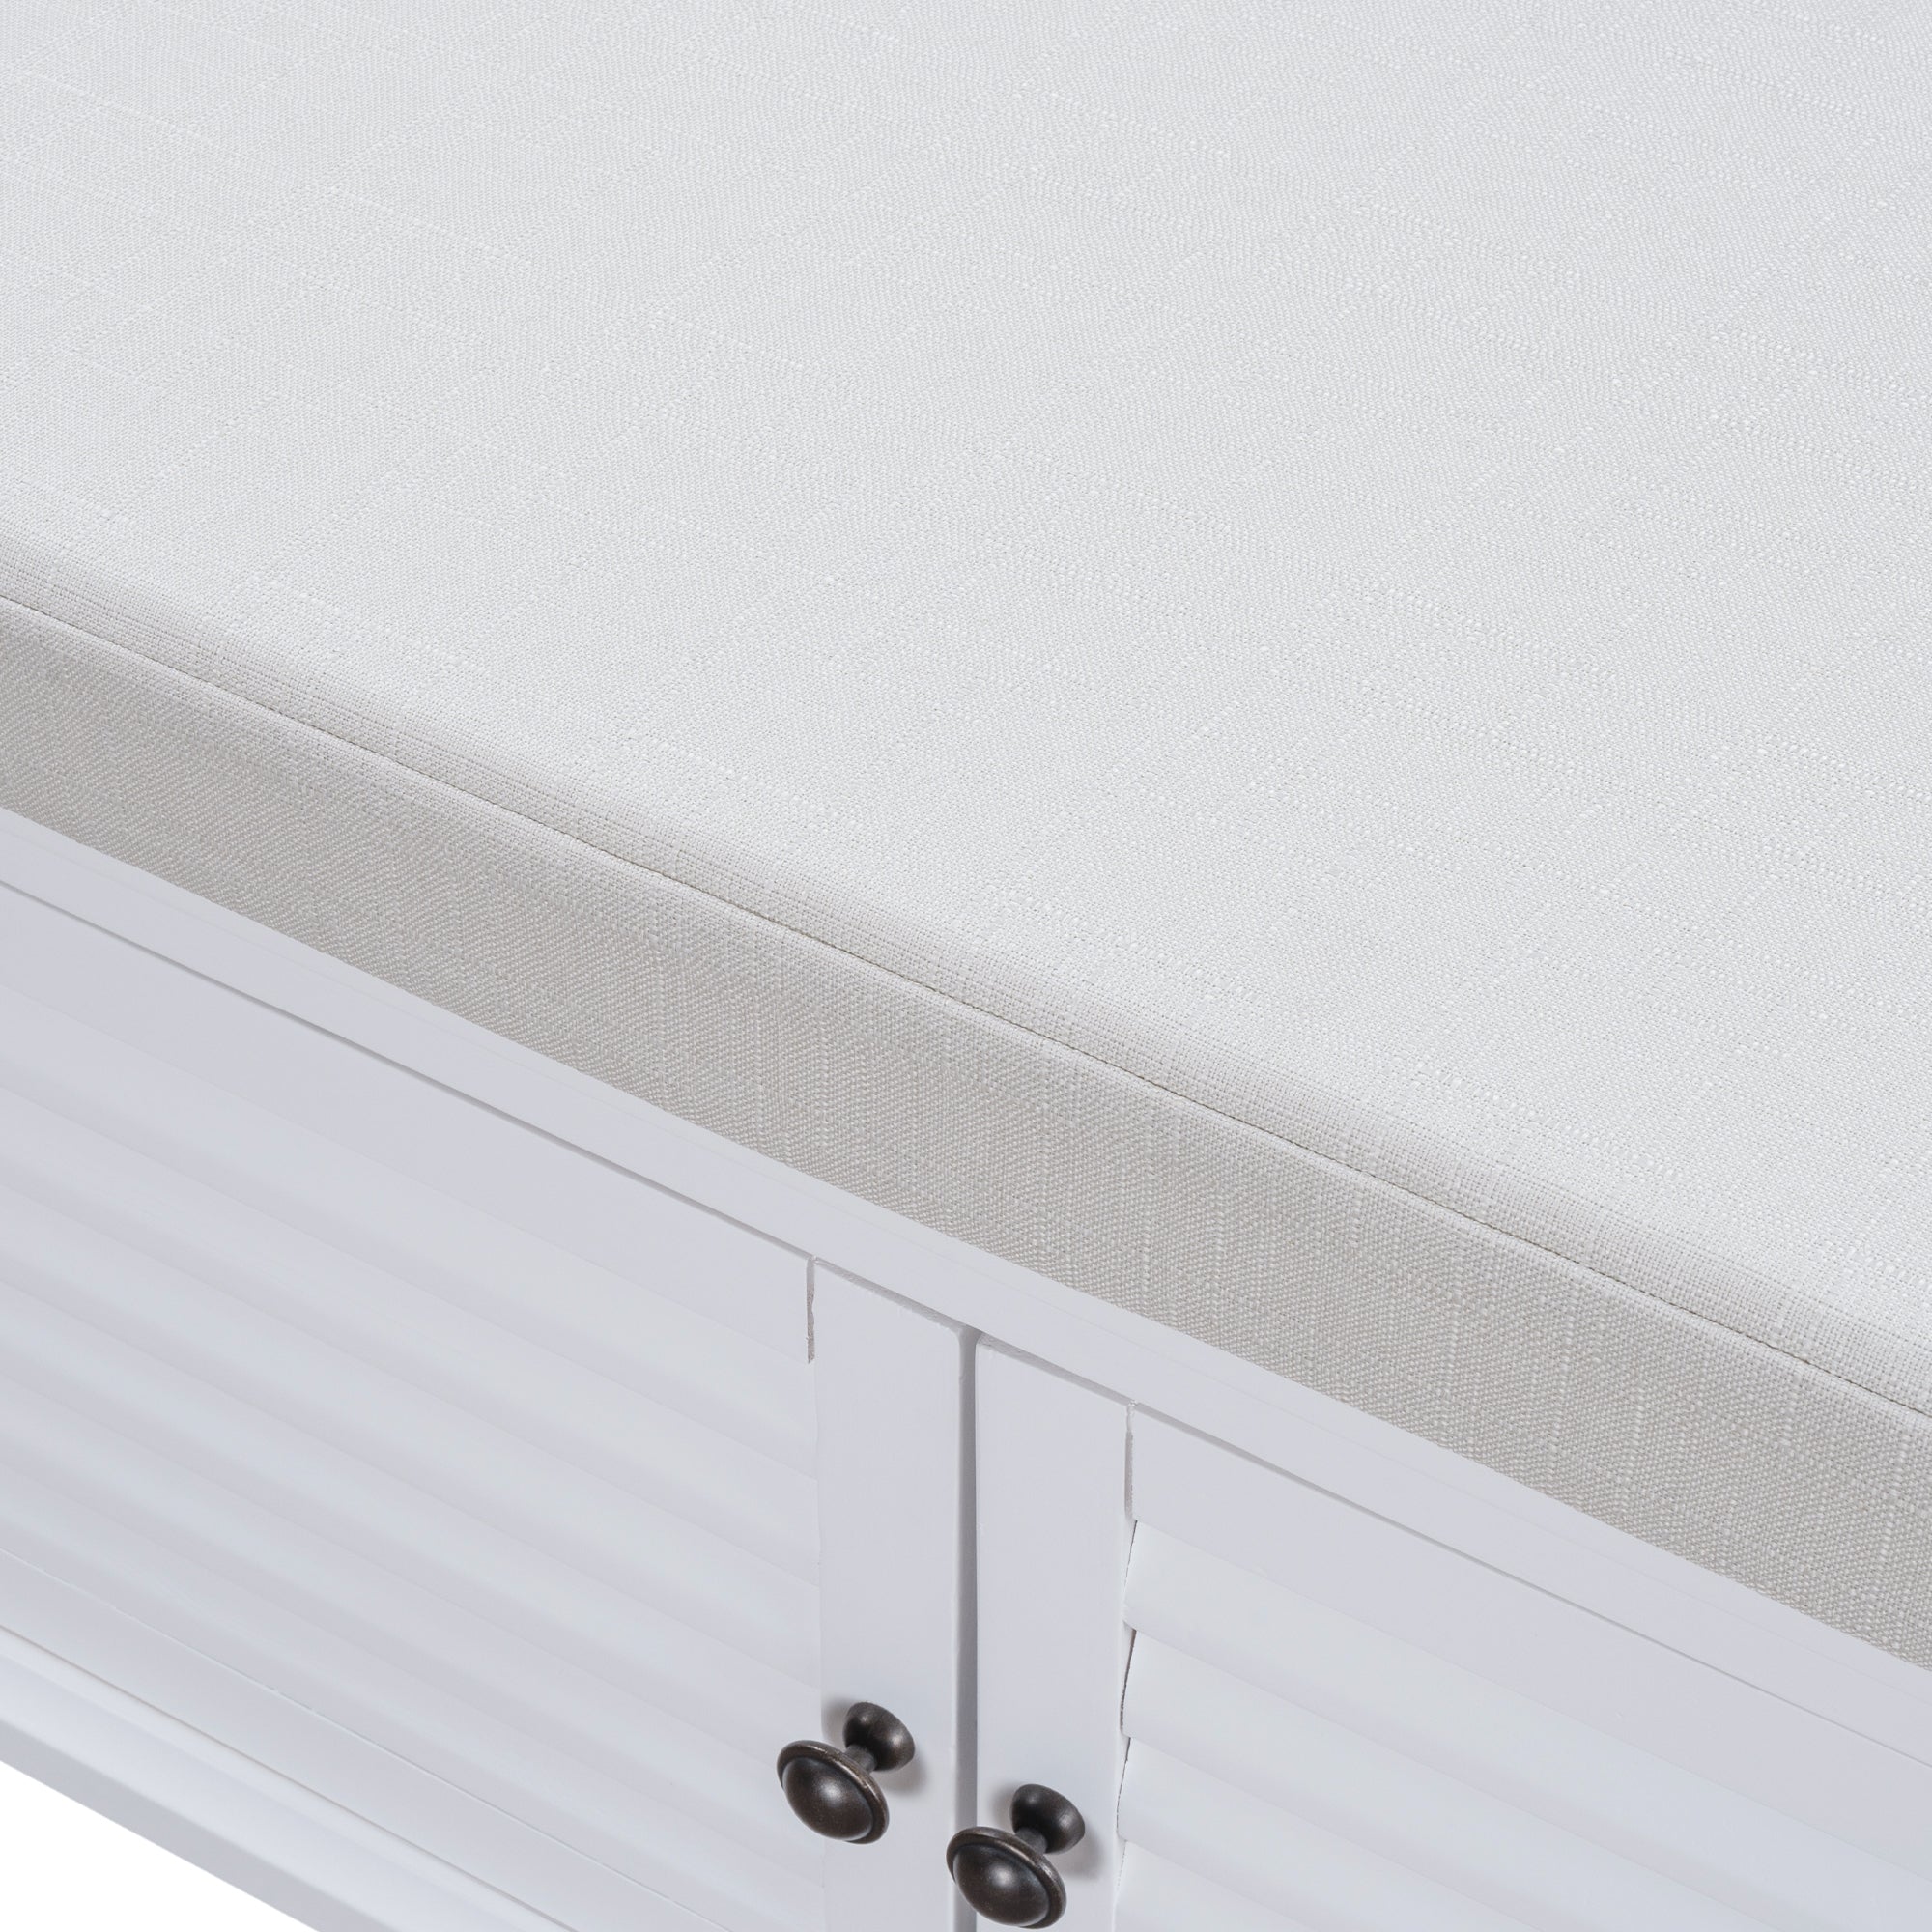 TREXM Storage Bench with Removable Cushion (White)